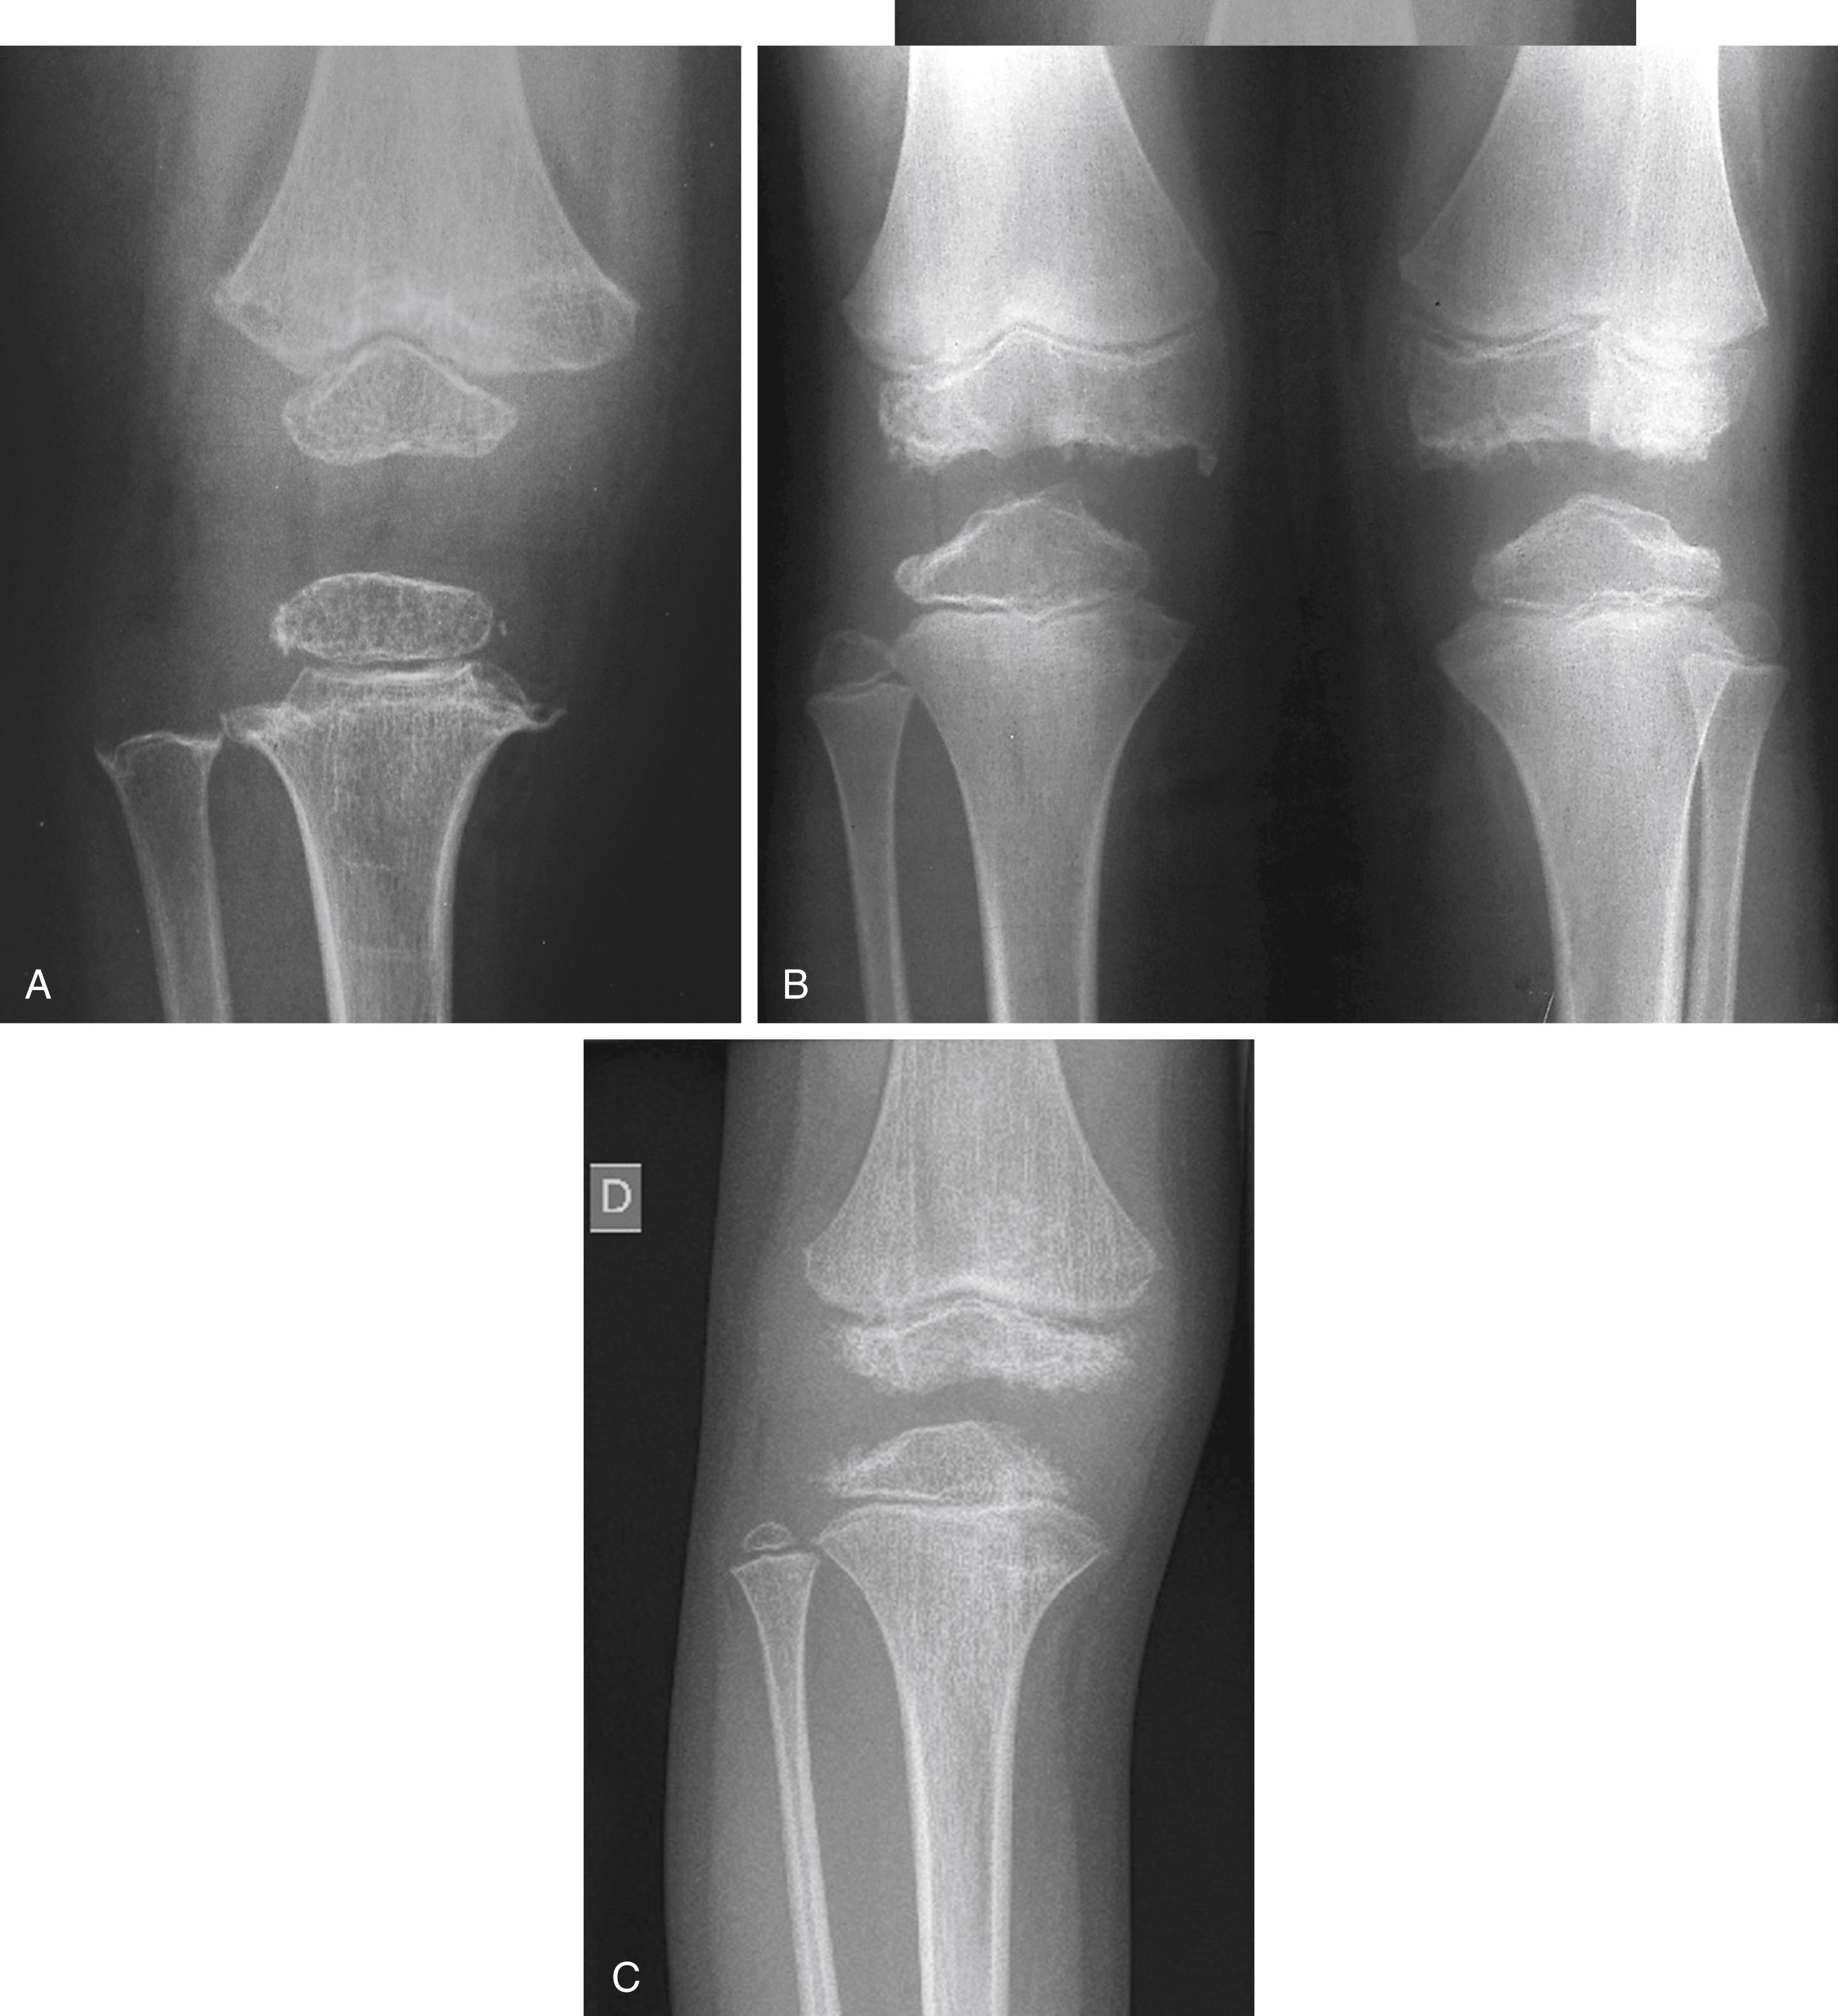 Fig. 49.2, Knee radiographs of a child with multiple epiphyseal dysplasia (MED). A, This child has MED as a result of a COMP mutation (most frequent molecularly defined form). Note the epiphyseal dysplasia with the small epiphyses sitting within the center of a somewhat abnormal metaphysis. B, This child has recessive MED as a result of SLC26A2 mutations. The epiphyses are dysplastic but cover more of the metaphyseal plate than in the COMP mutation affected knee. C, This child has MED as a result of a mutation in MATN3. The epiphyses of the knee are flattened laterally.